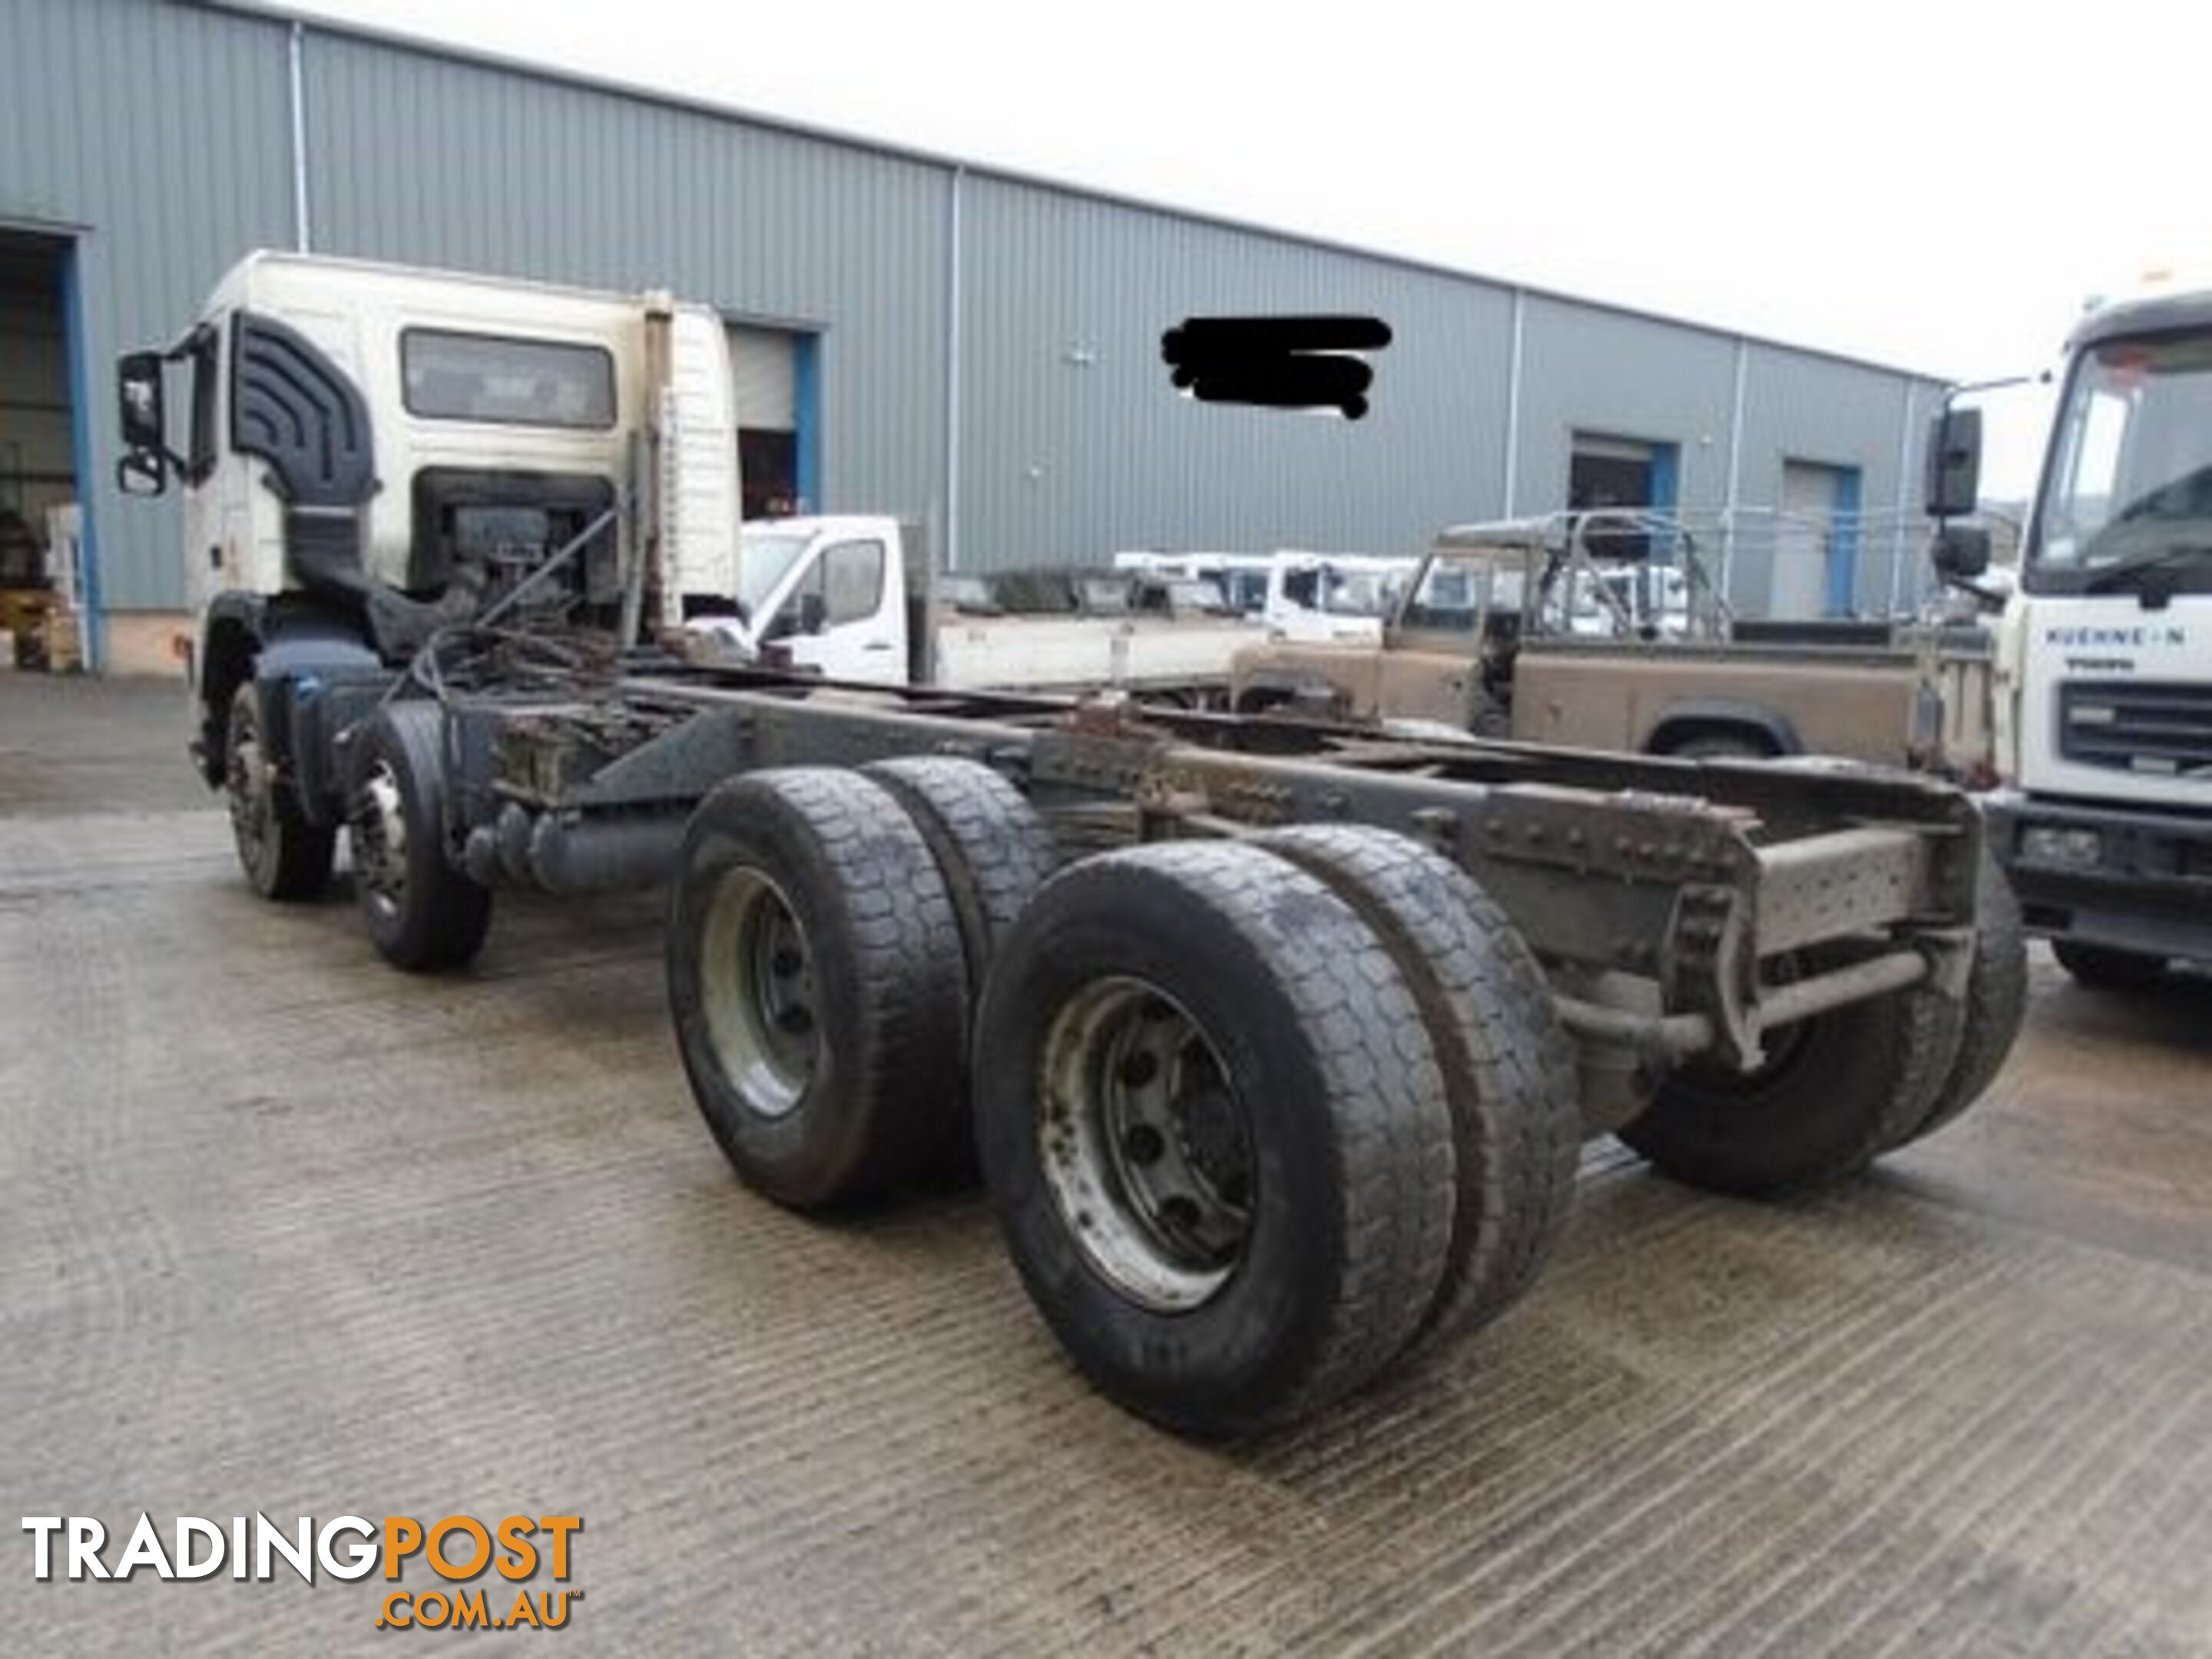 2007, VOLVO FM 9  Prime Mover Wrecking Now